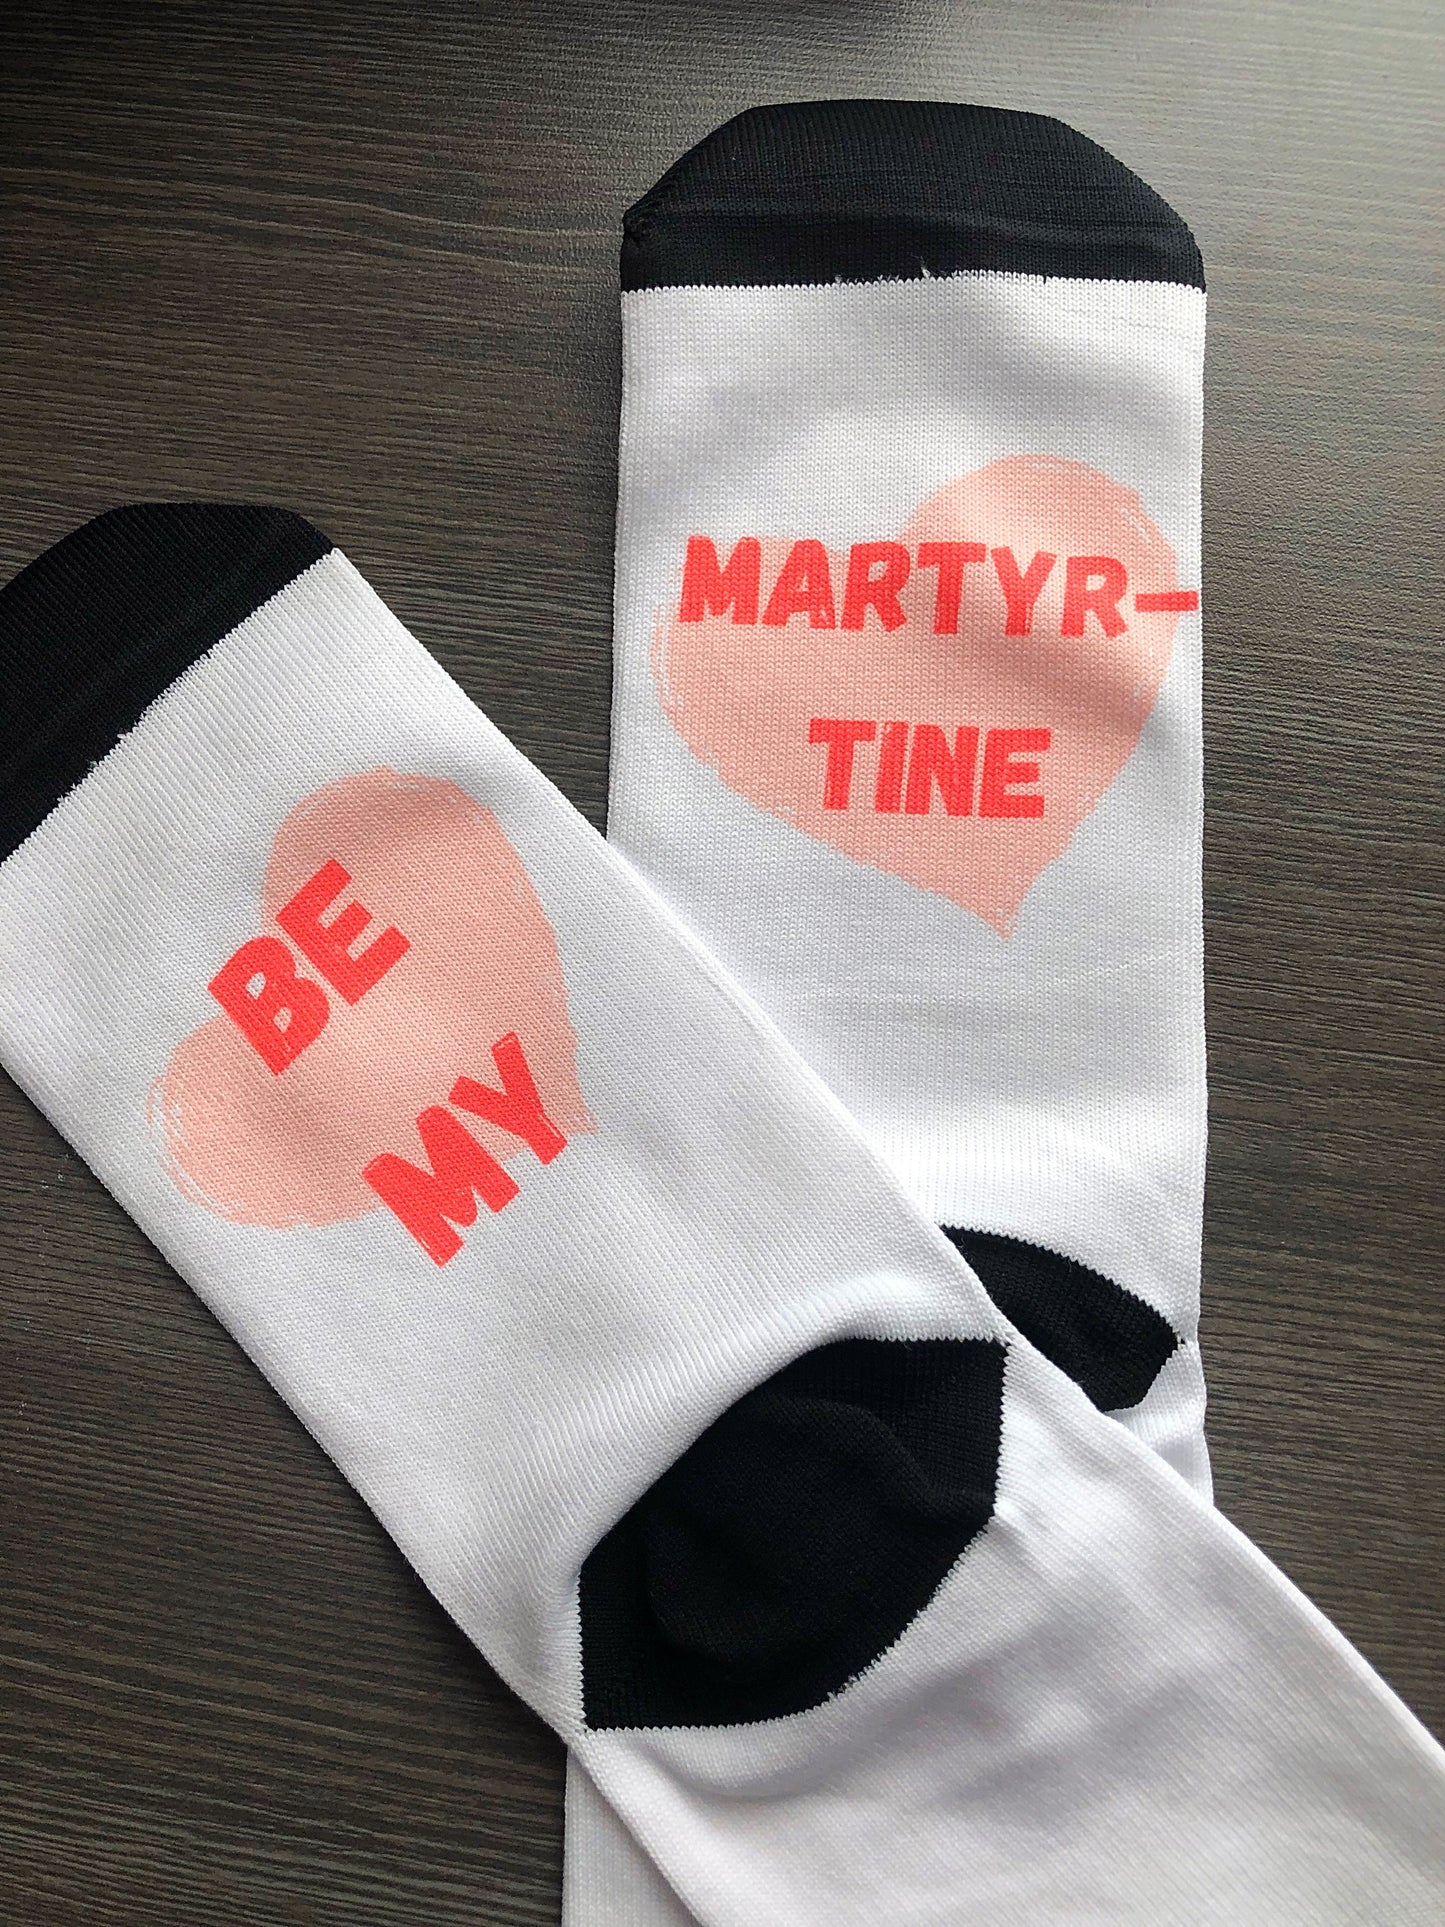 Be my Martyr-tine His and Her socks - Catholic couple gift